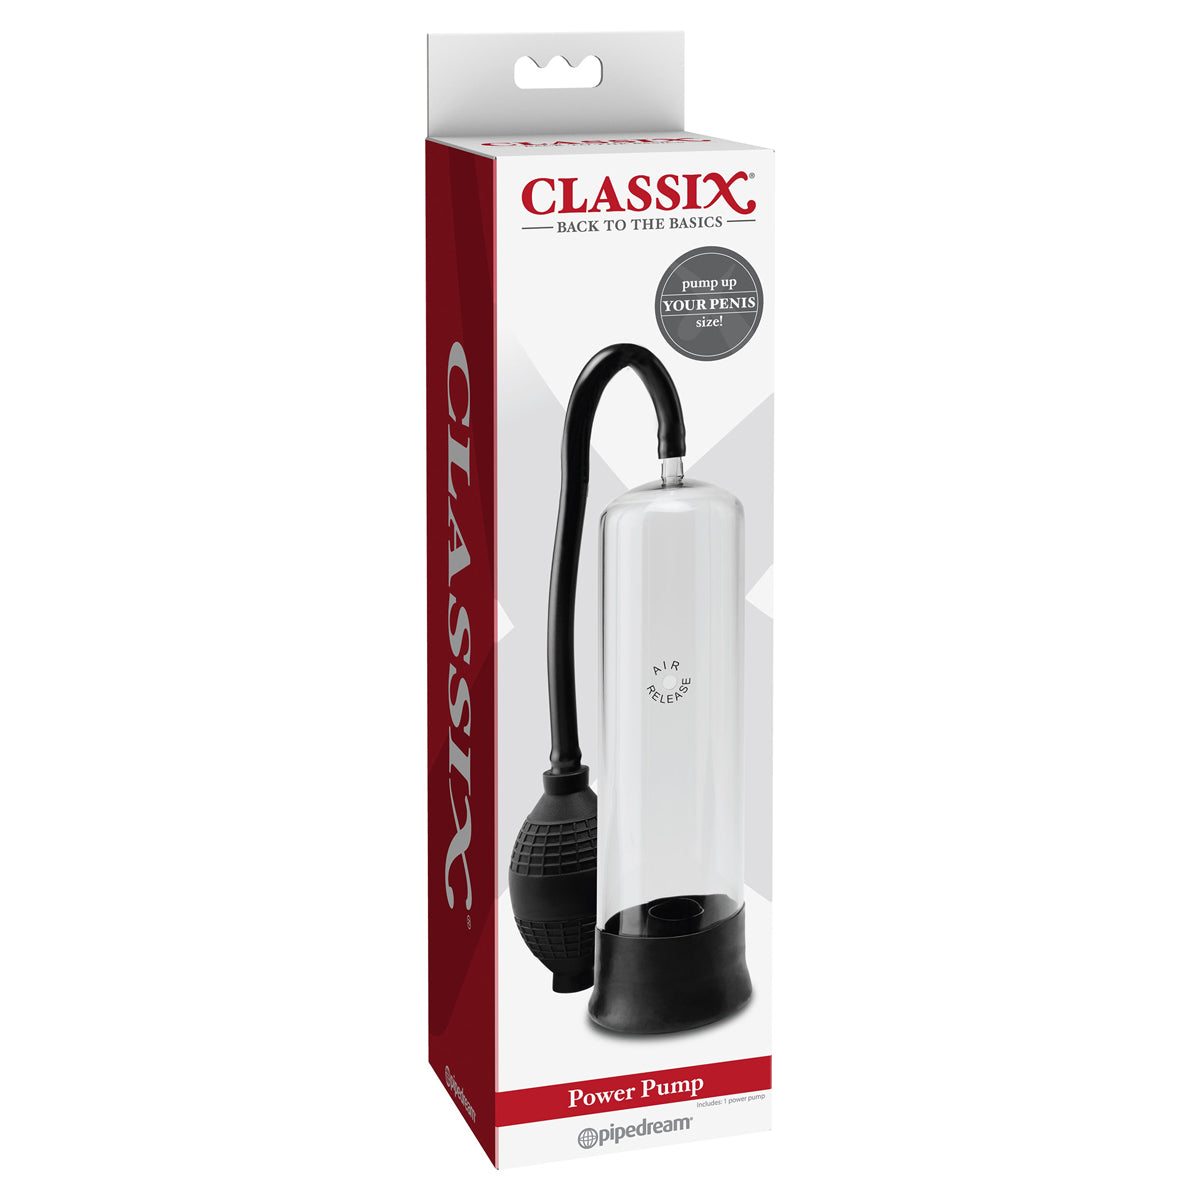 Pipedream Products Classix Power Pump